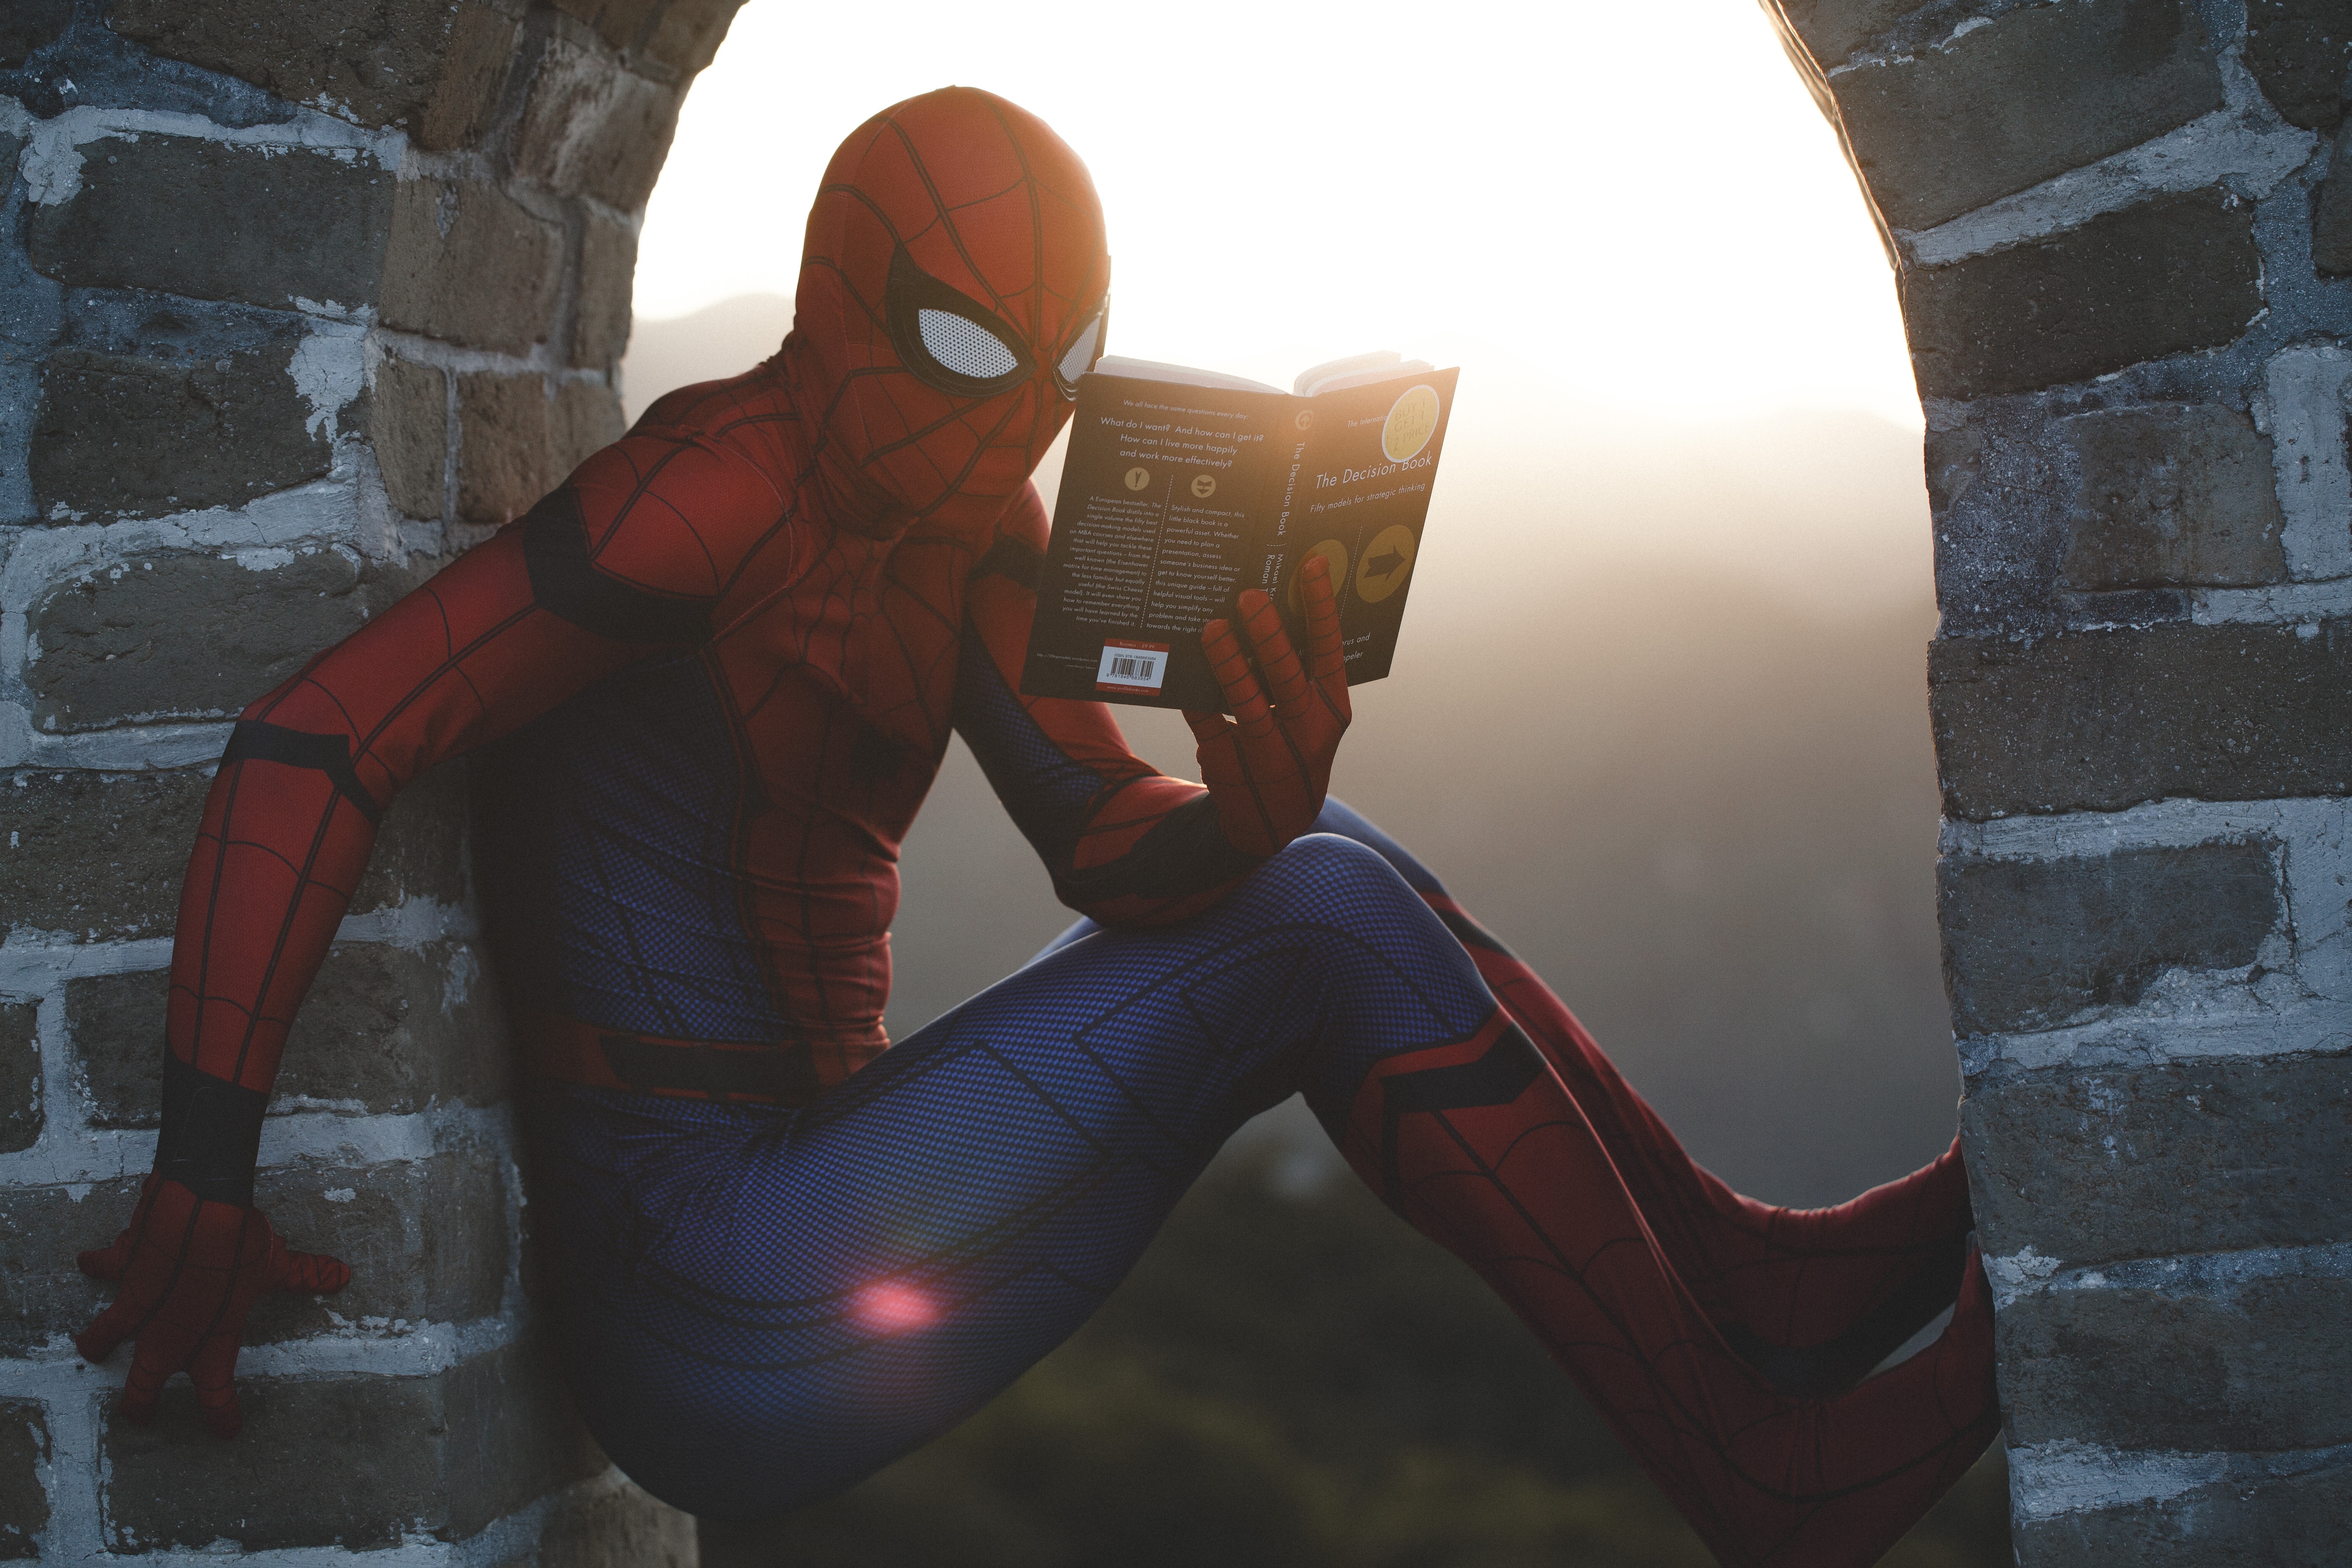 spiderman reading the decision book